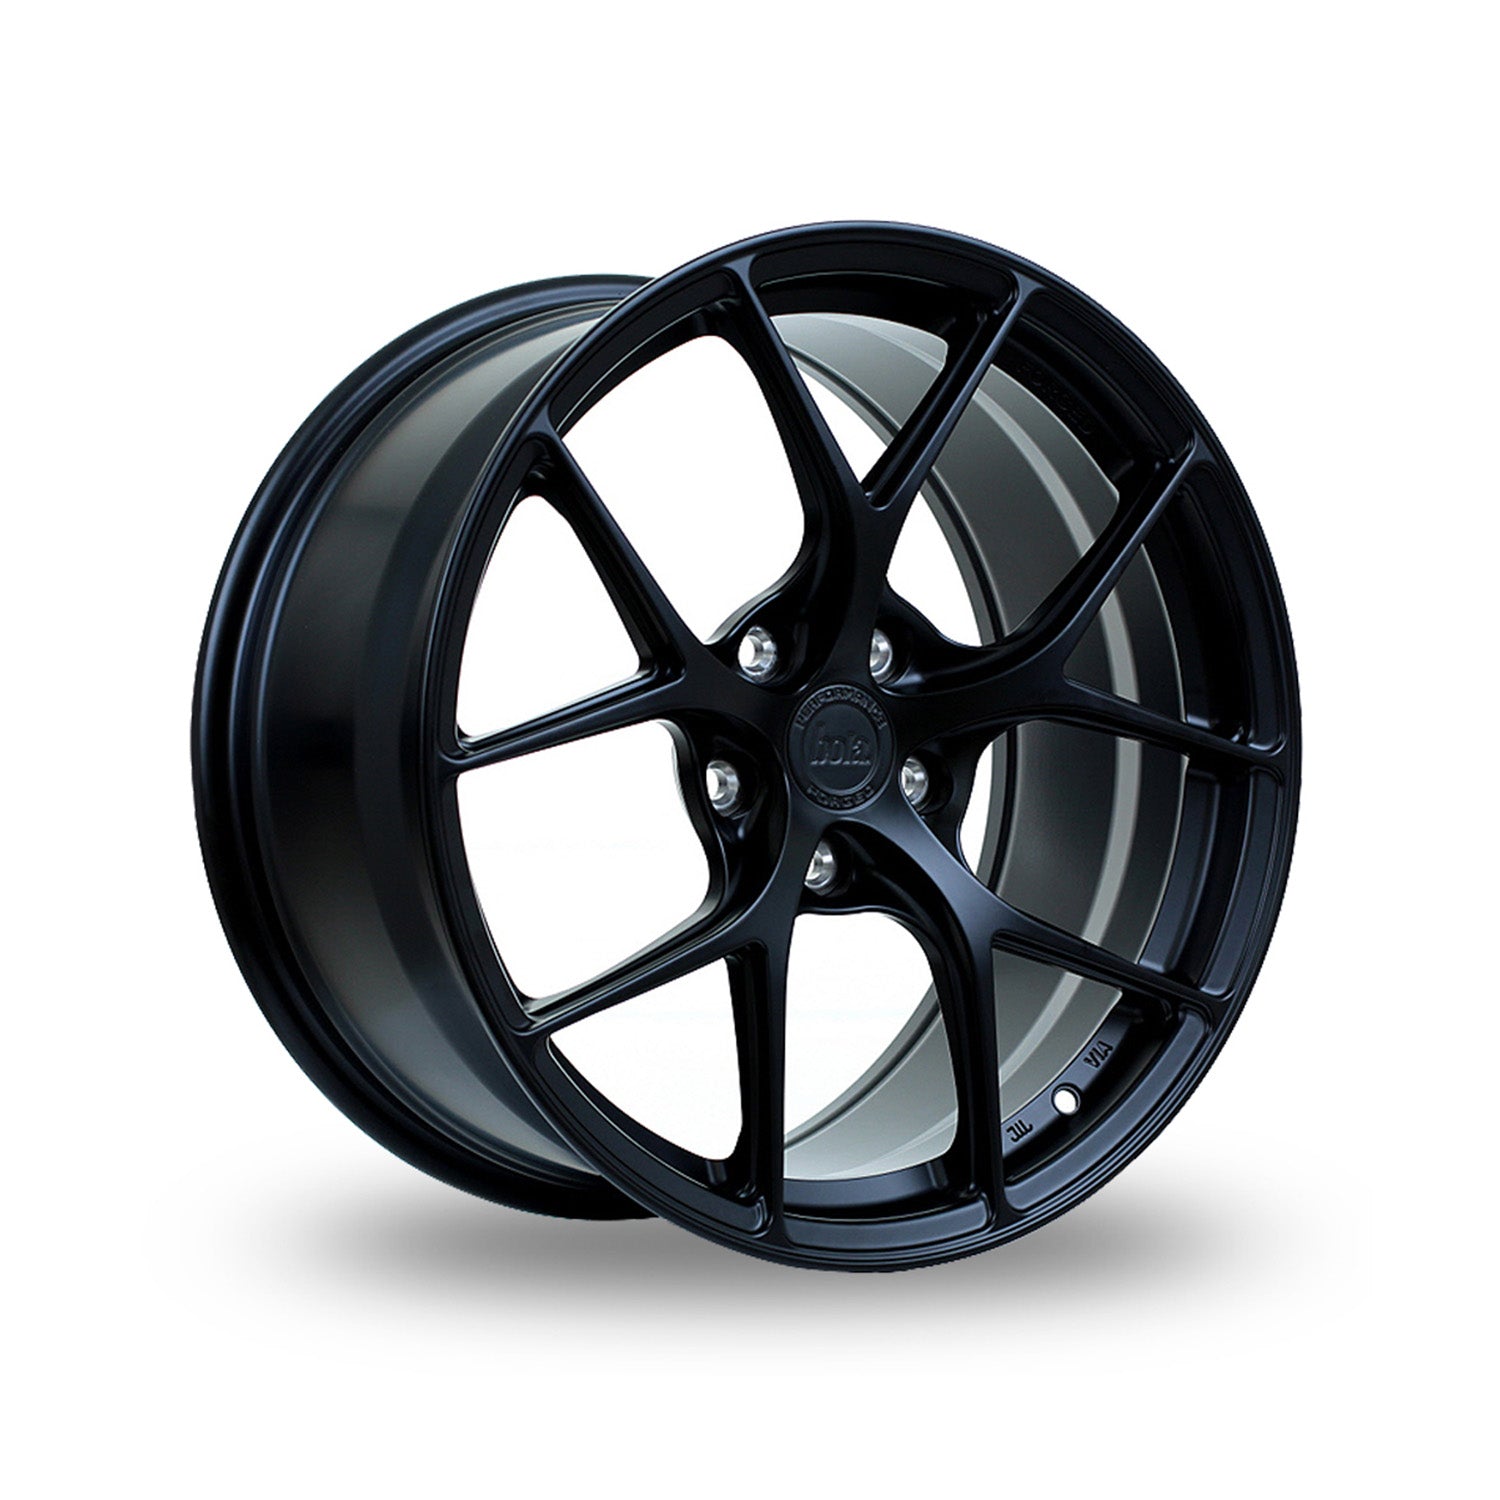 Bola FP2 19 Forged Alloy Wheels In Satin Black - Wider Rear